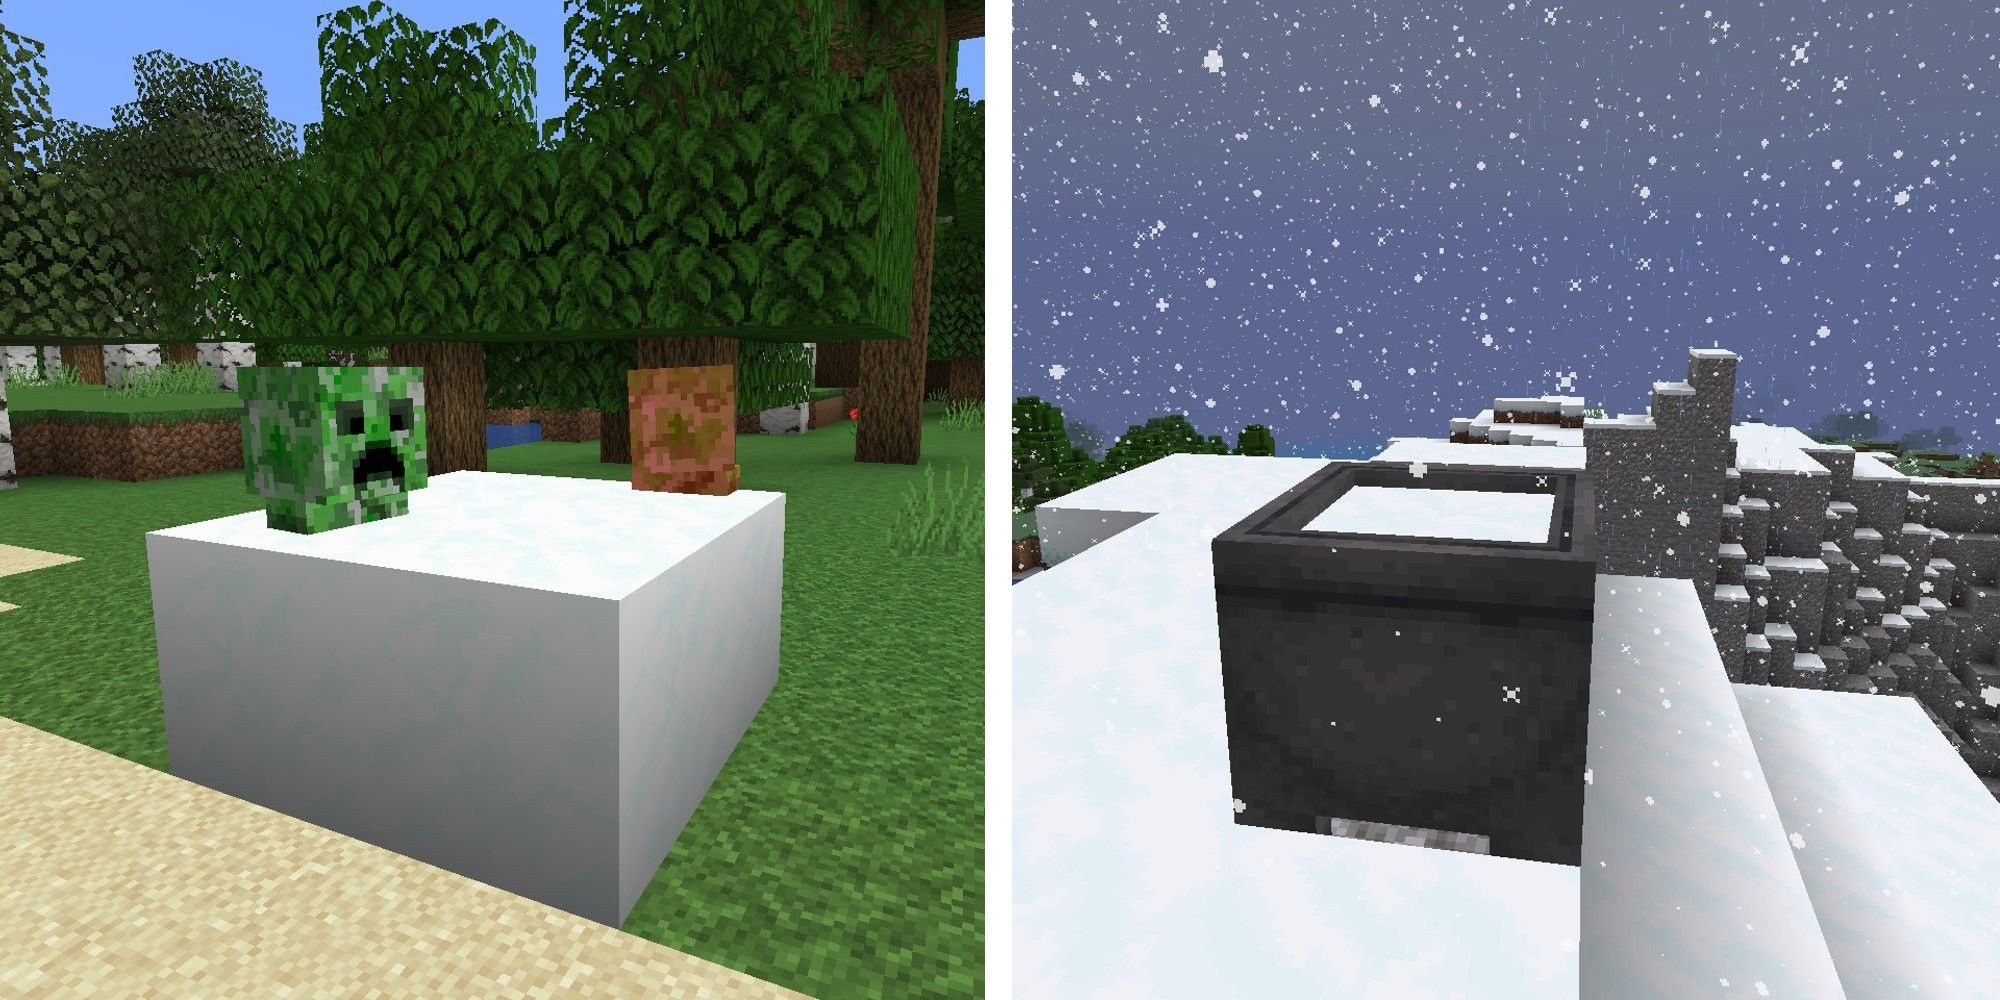 image of creepers in powdered snow next to image of cauldron filled with powdered snow